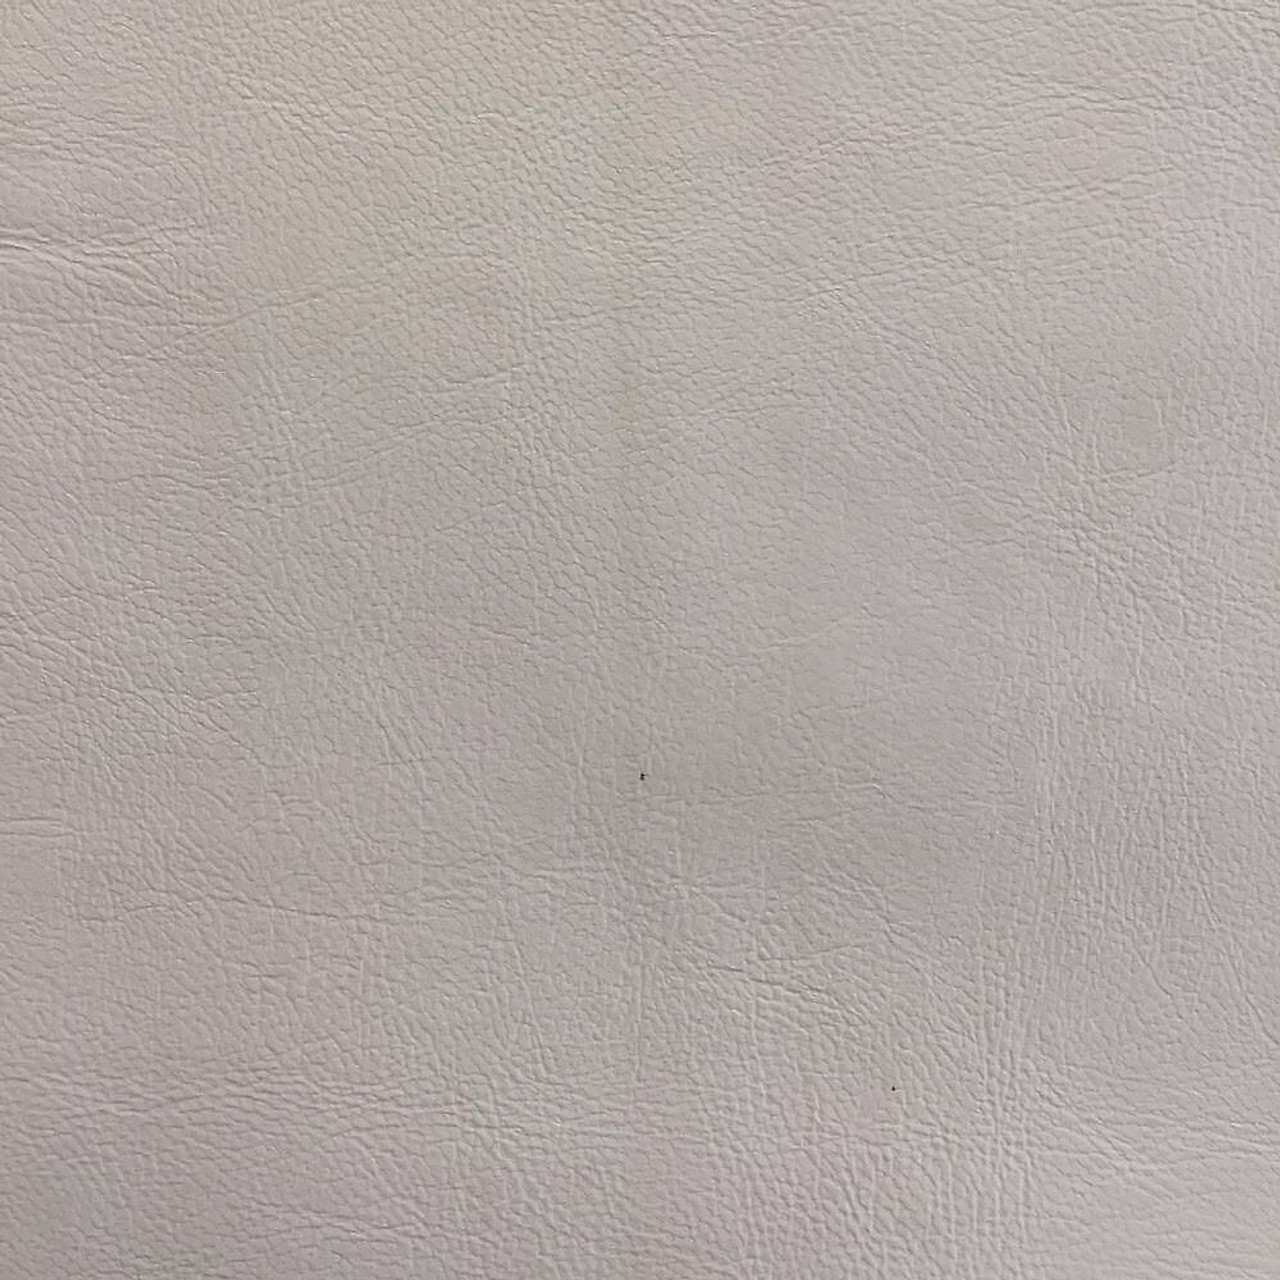 Faux Leather Sheets A4 Size Pvc Printed Crafting Faux Leather 